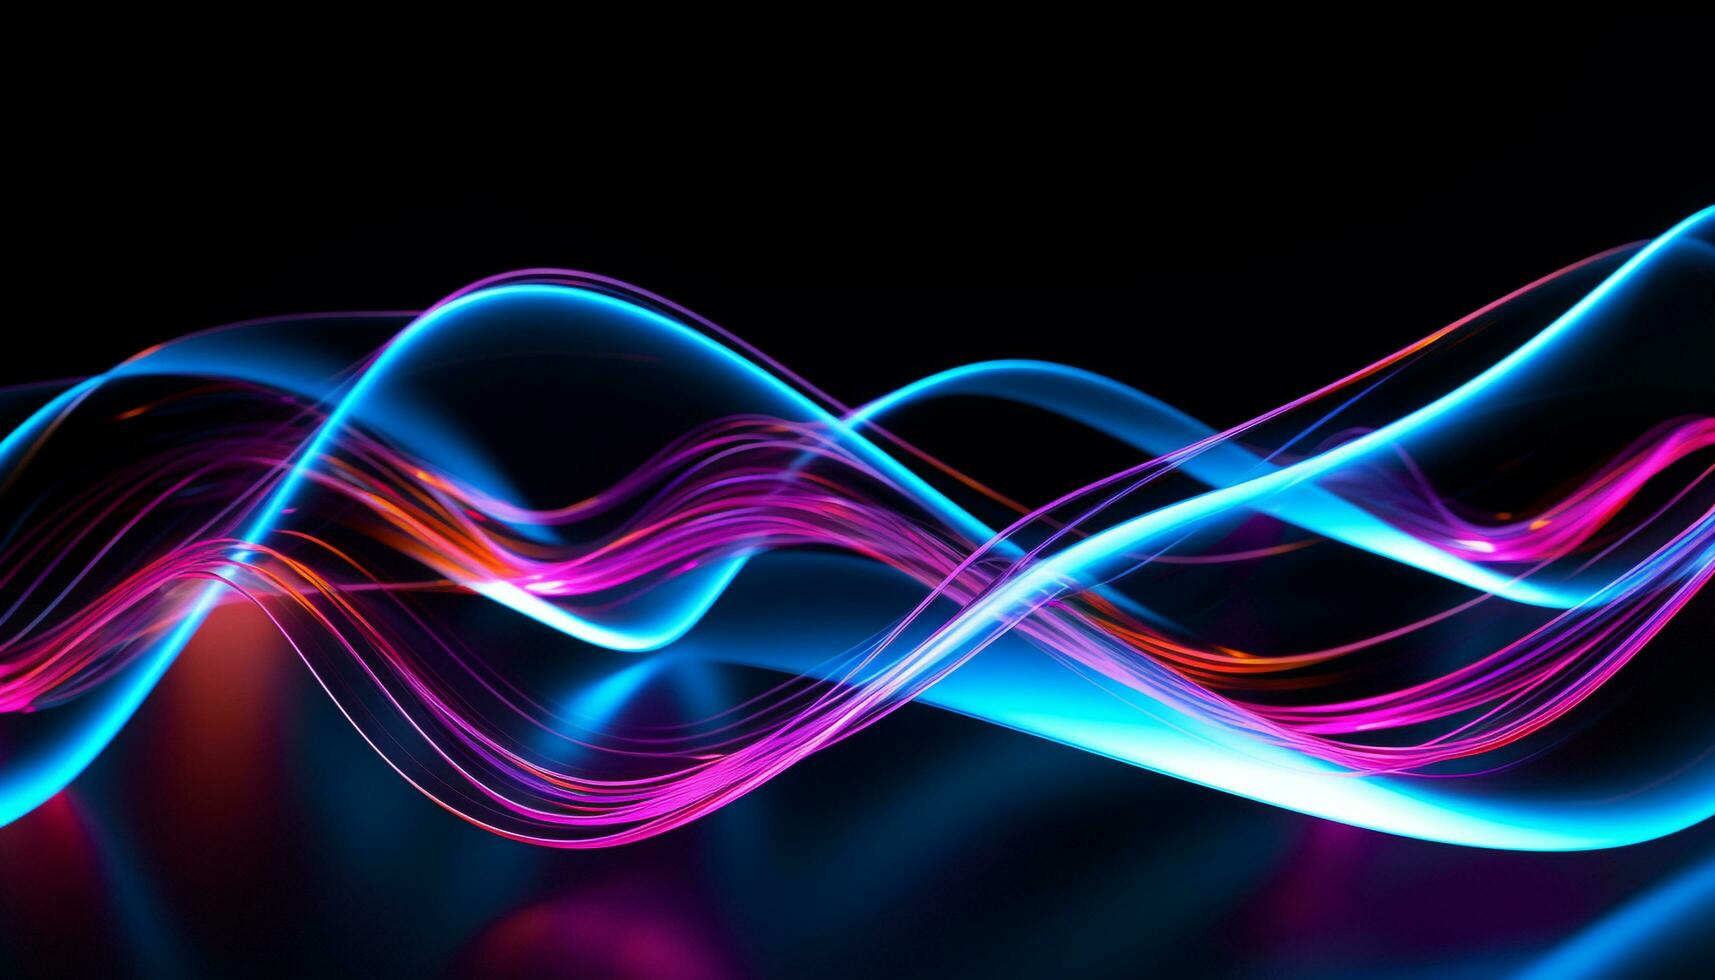 AI generated Neon lights painting a vibrant, flowing wave pattern generated by AI photo